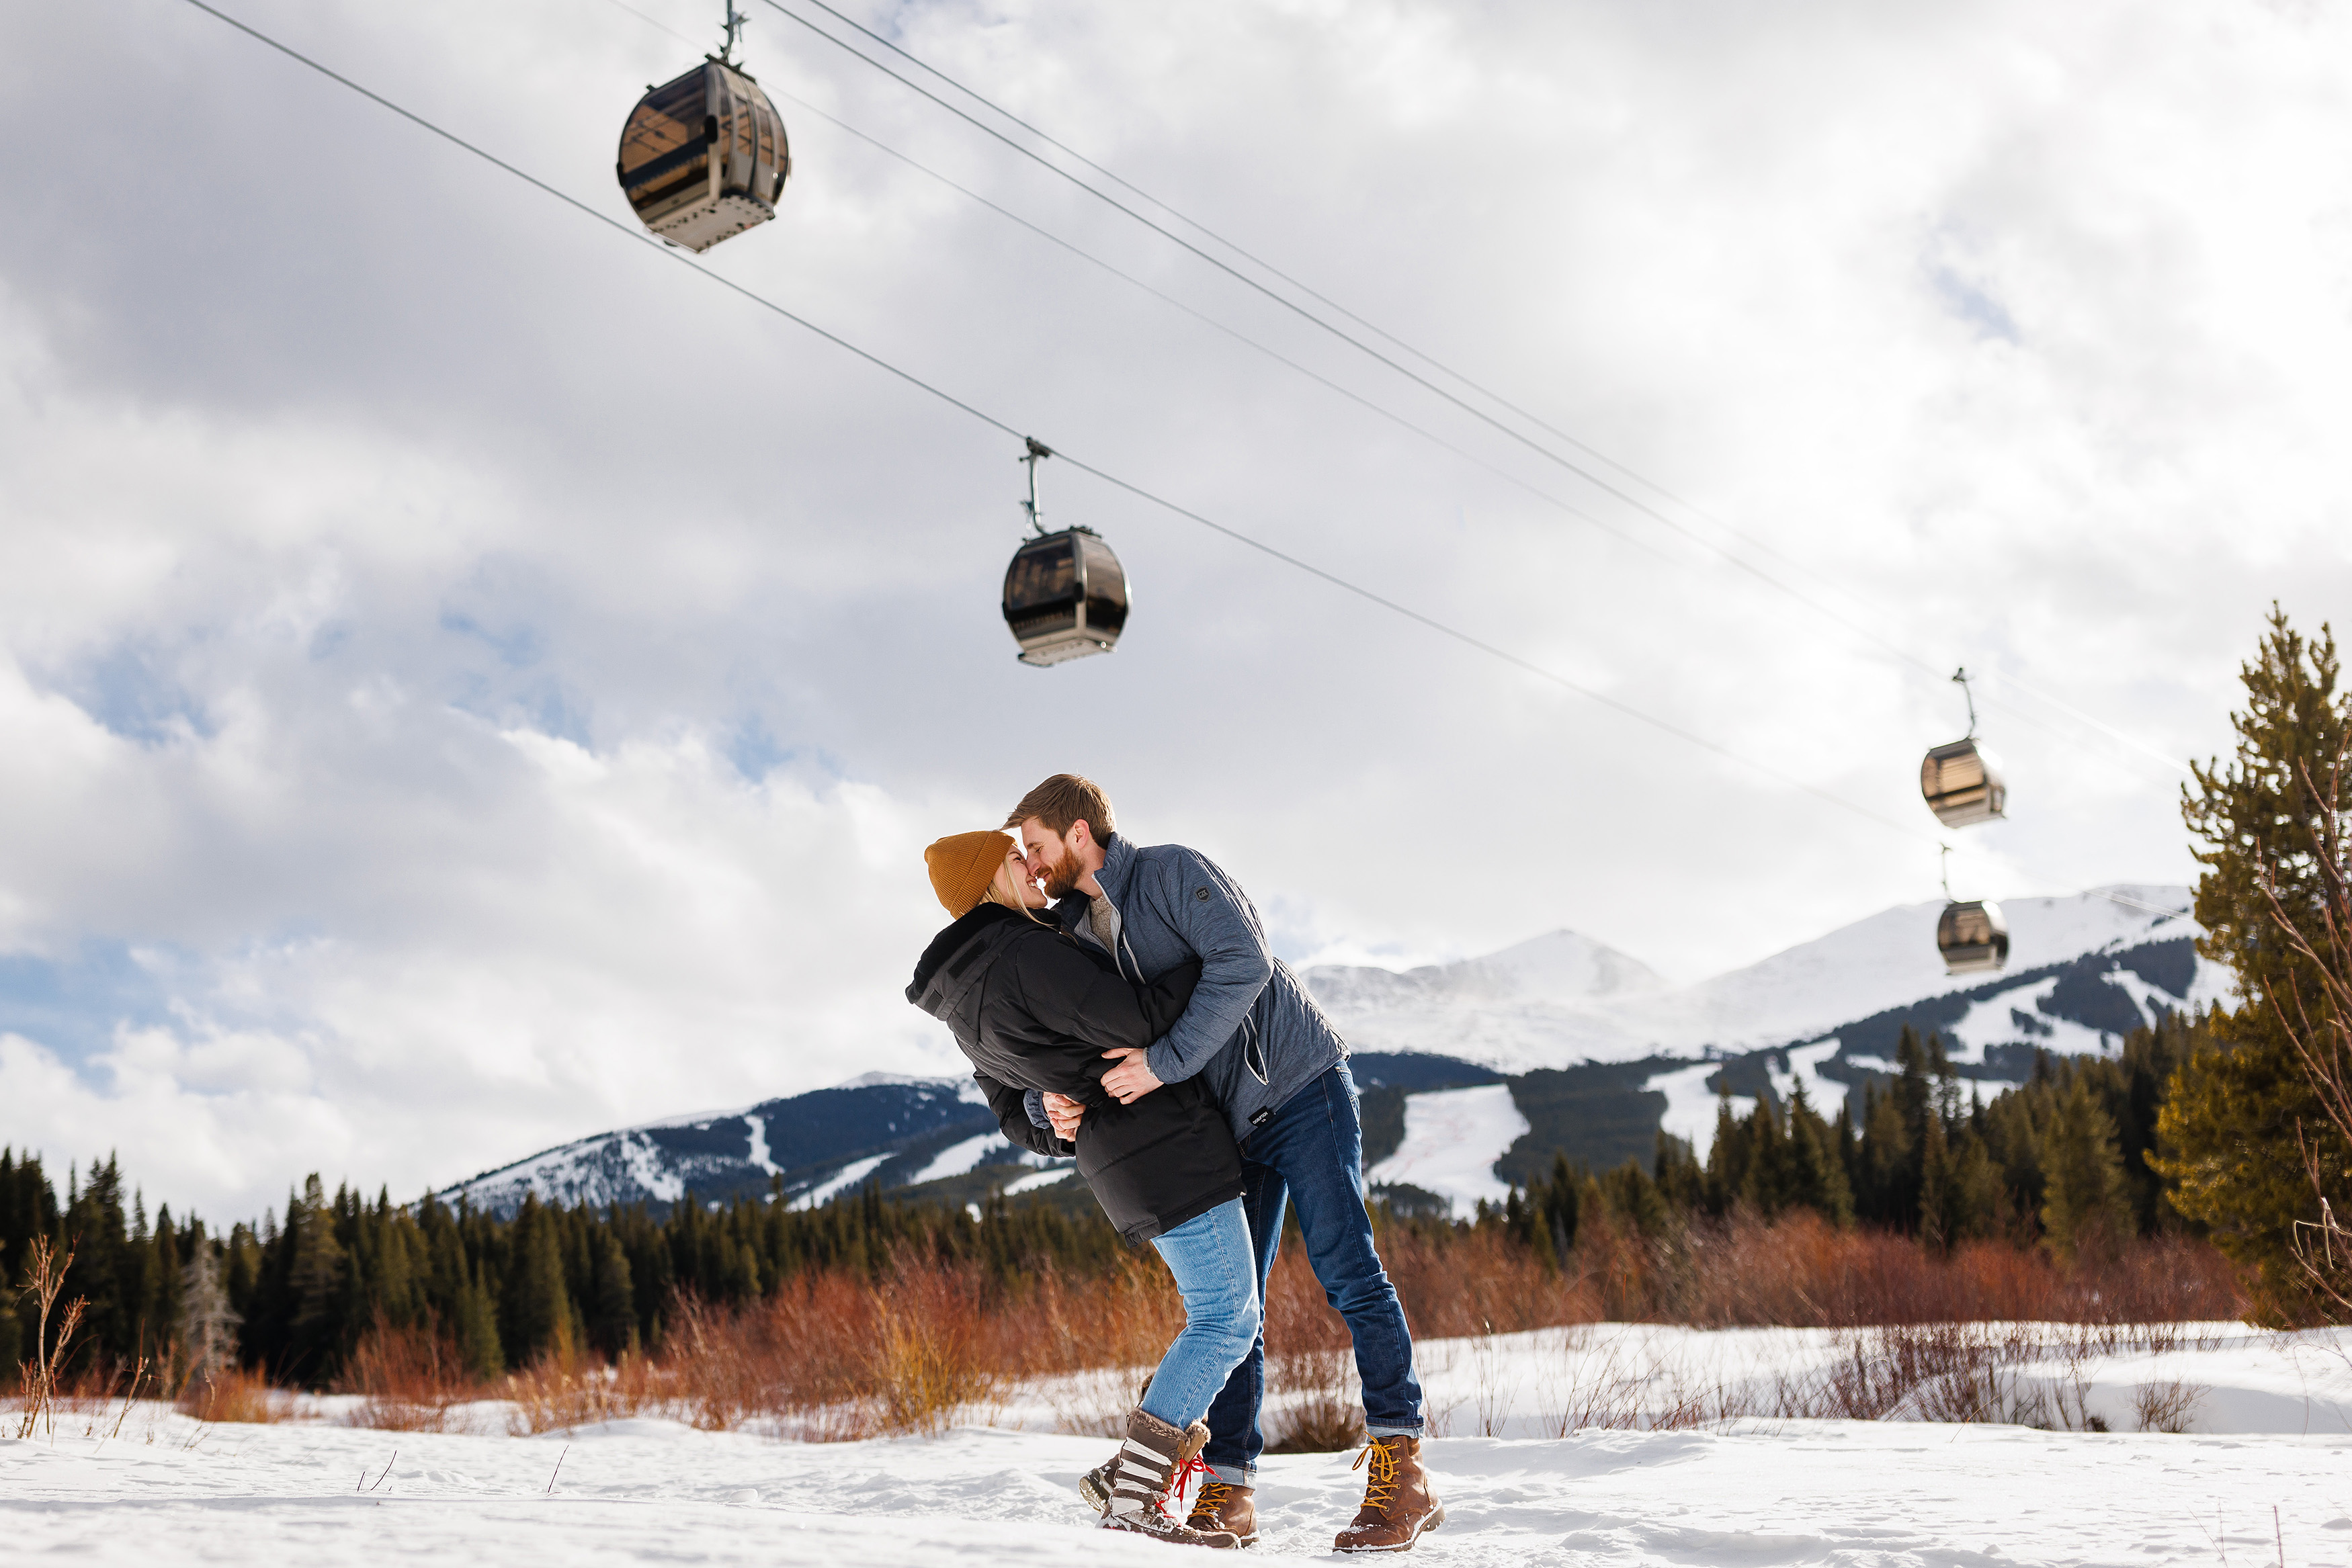 Zac and Audrey share a moment and a kiss underneath the Breckenridge Gondola shortly after their Breckenridge Nordic Center Proposal.